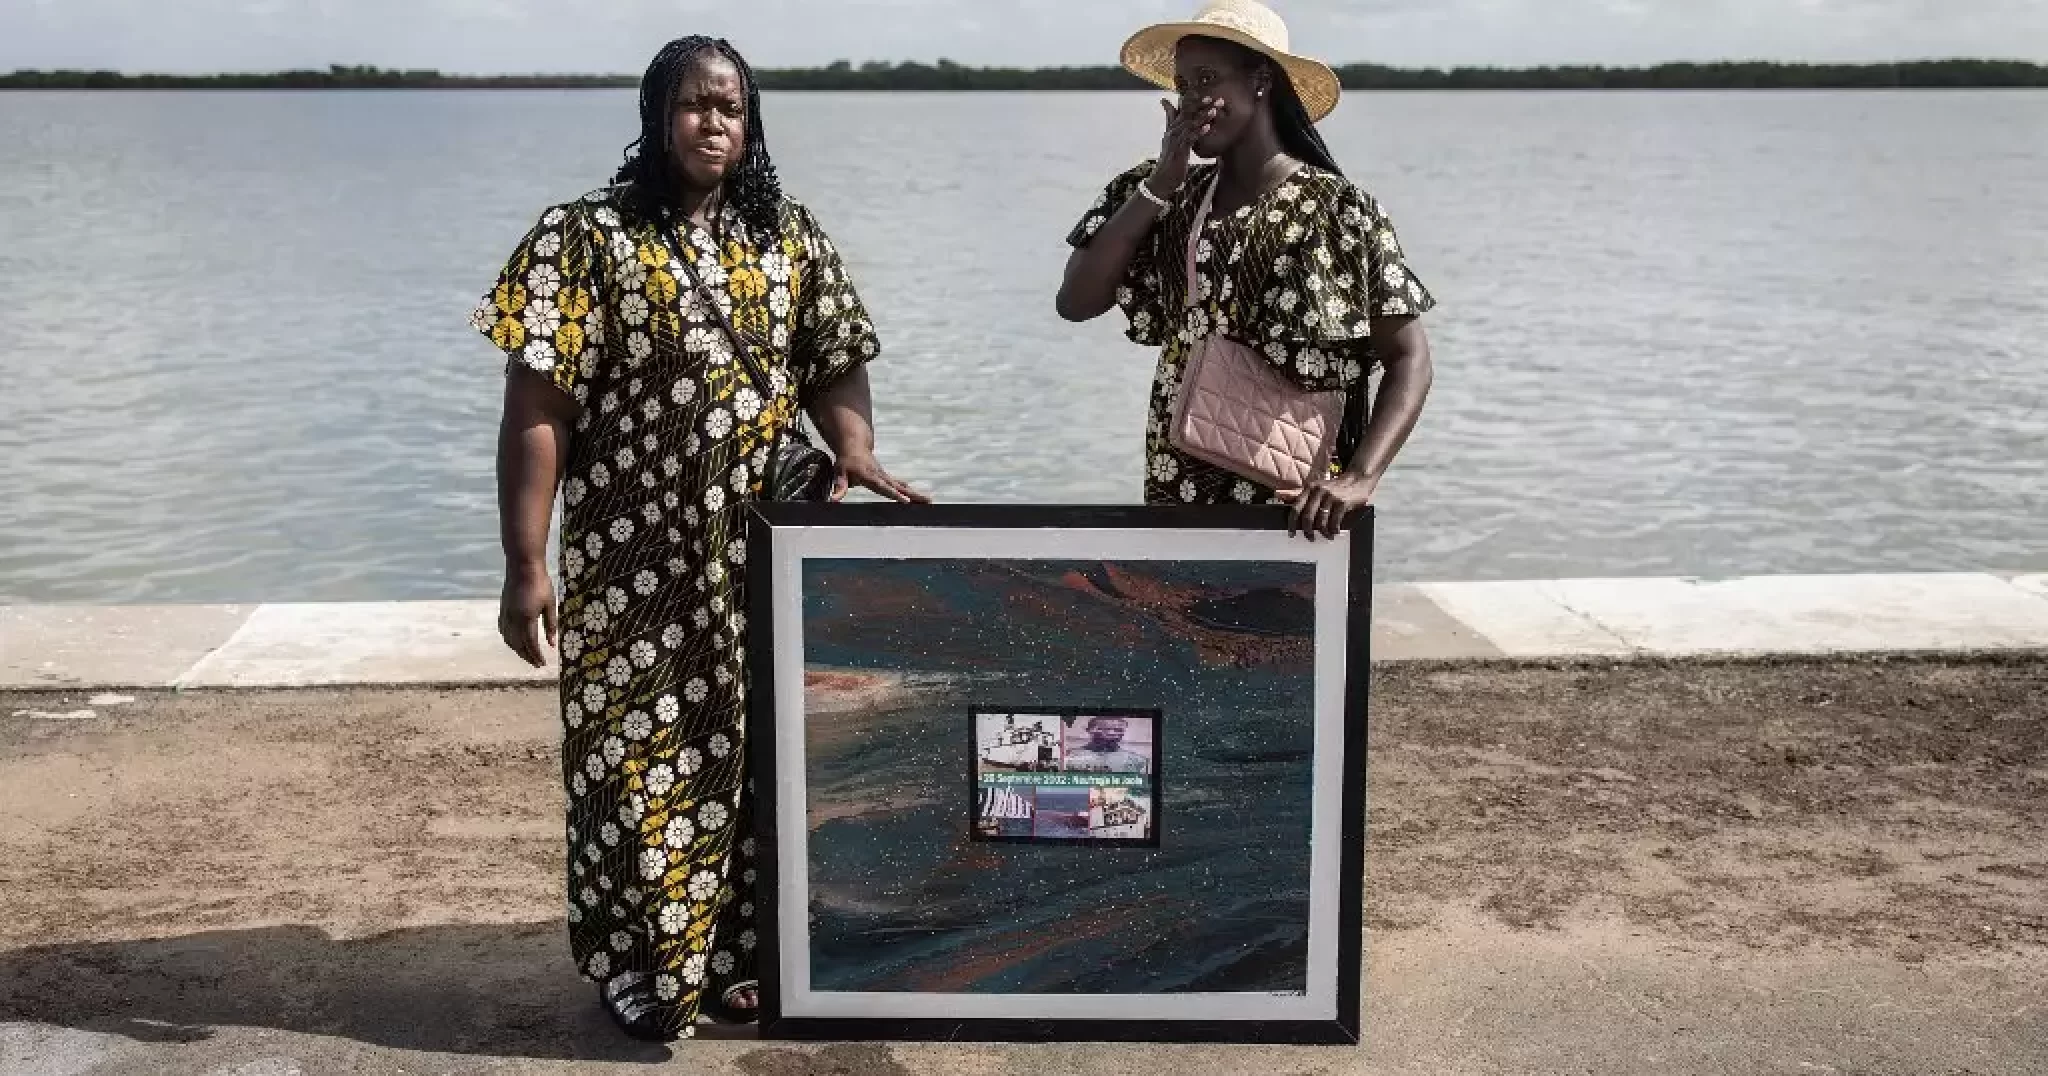 Senegal: Relatives and officials commemorate victims of 2002 shipwreck